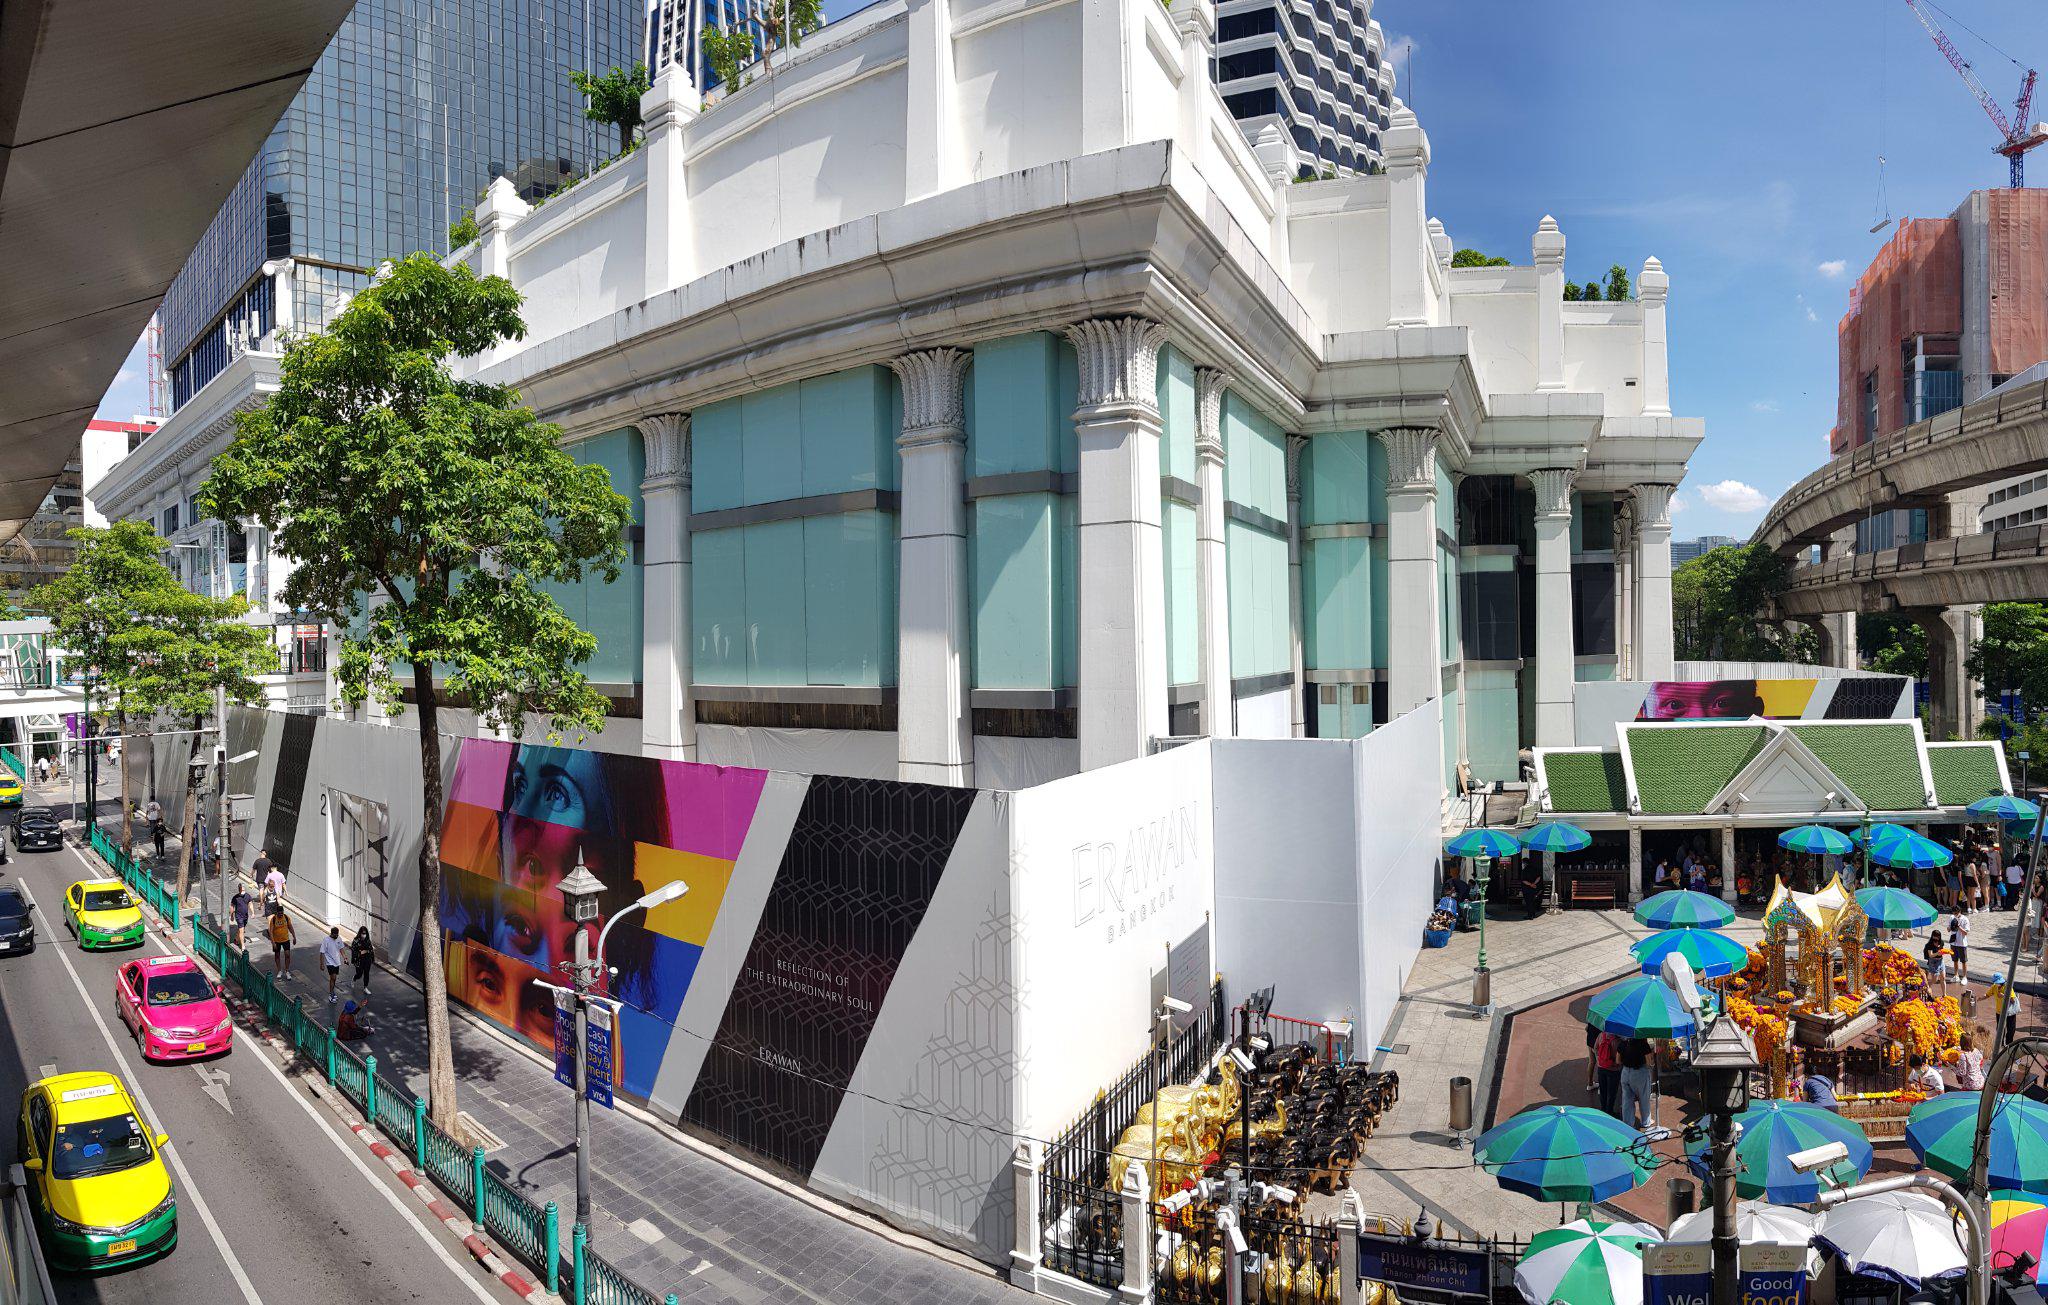 FOS is commissioned for Renovation Design of Erawan Bangkok Shopping Mall